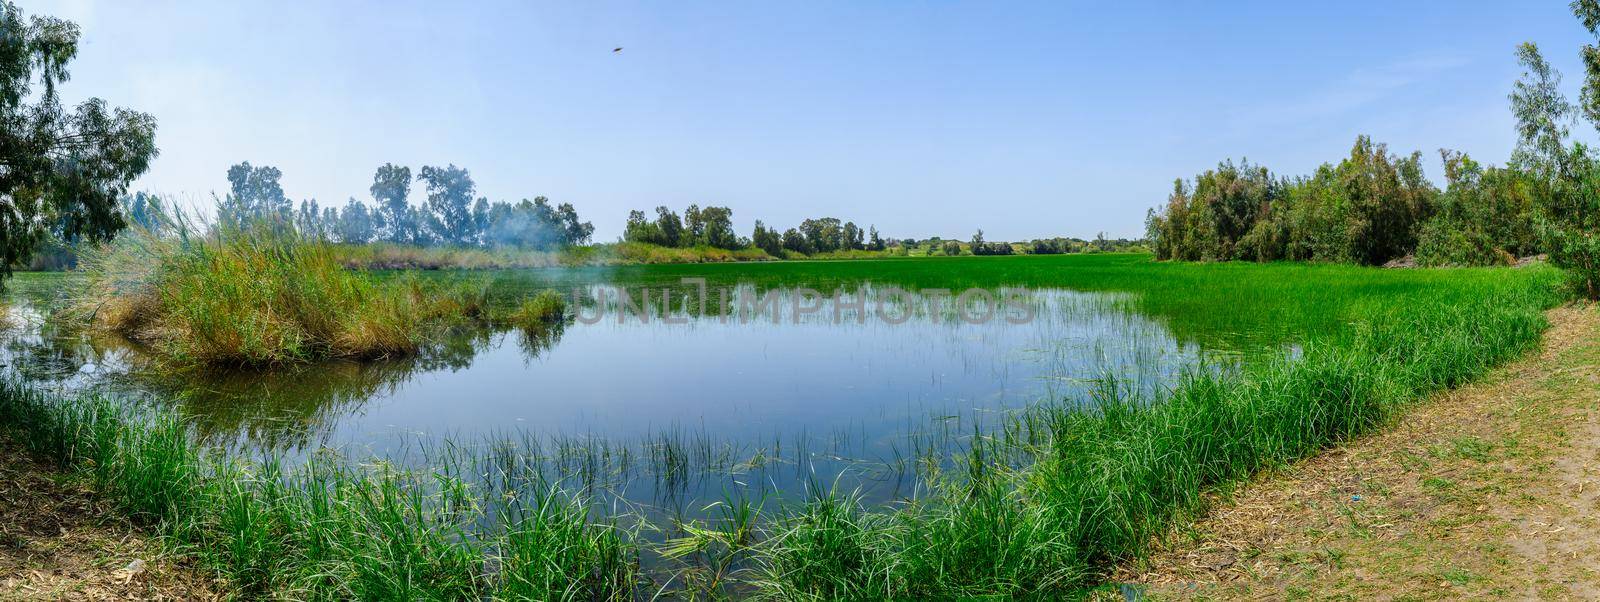 Panoramic view of the Berekhat Yaar (forest pool) nature reserve, part of HaSharon park, in Hadera, Northern Israel